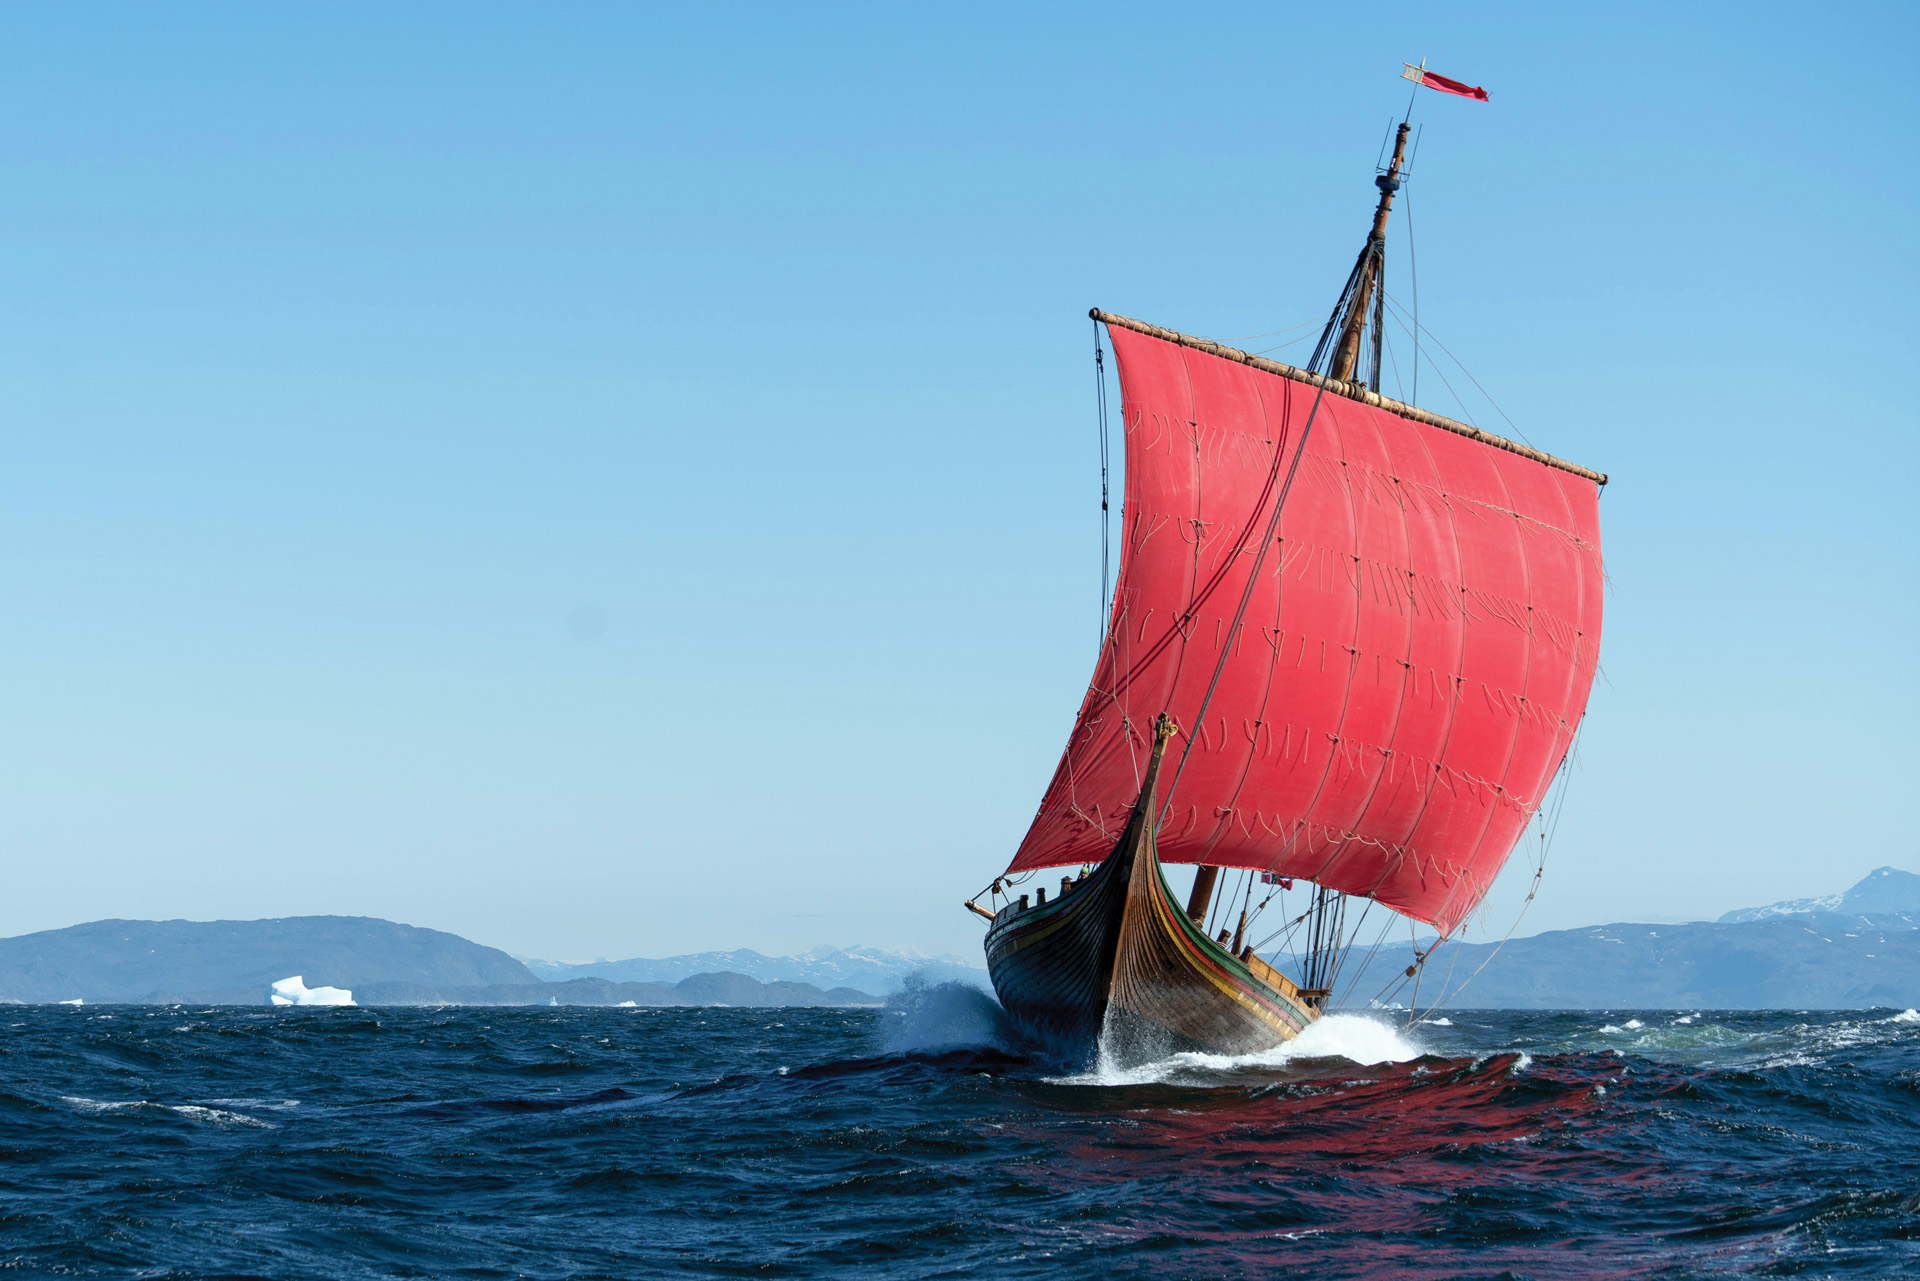 The Norwegians who constructed the clinker-built replica Viking longship, Draken Harald Harfargre, in 2012 used traditional techniques. Longships enabled the Vikings to transport their armies throughout Europe and conduct amphibious assaults in estuaries and navigable rivers.